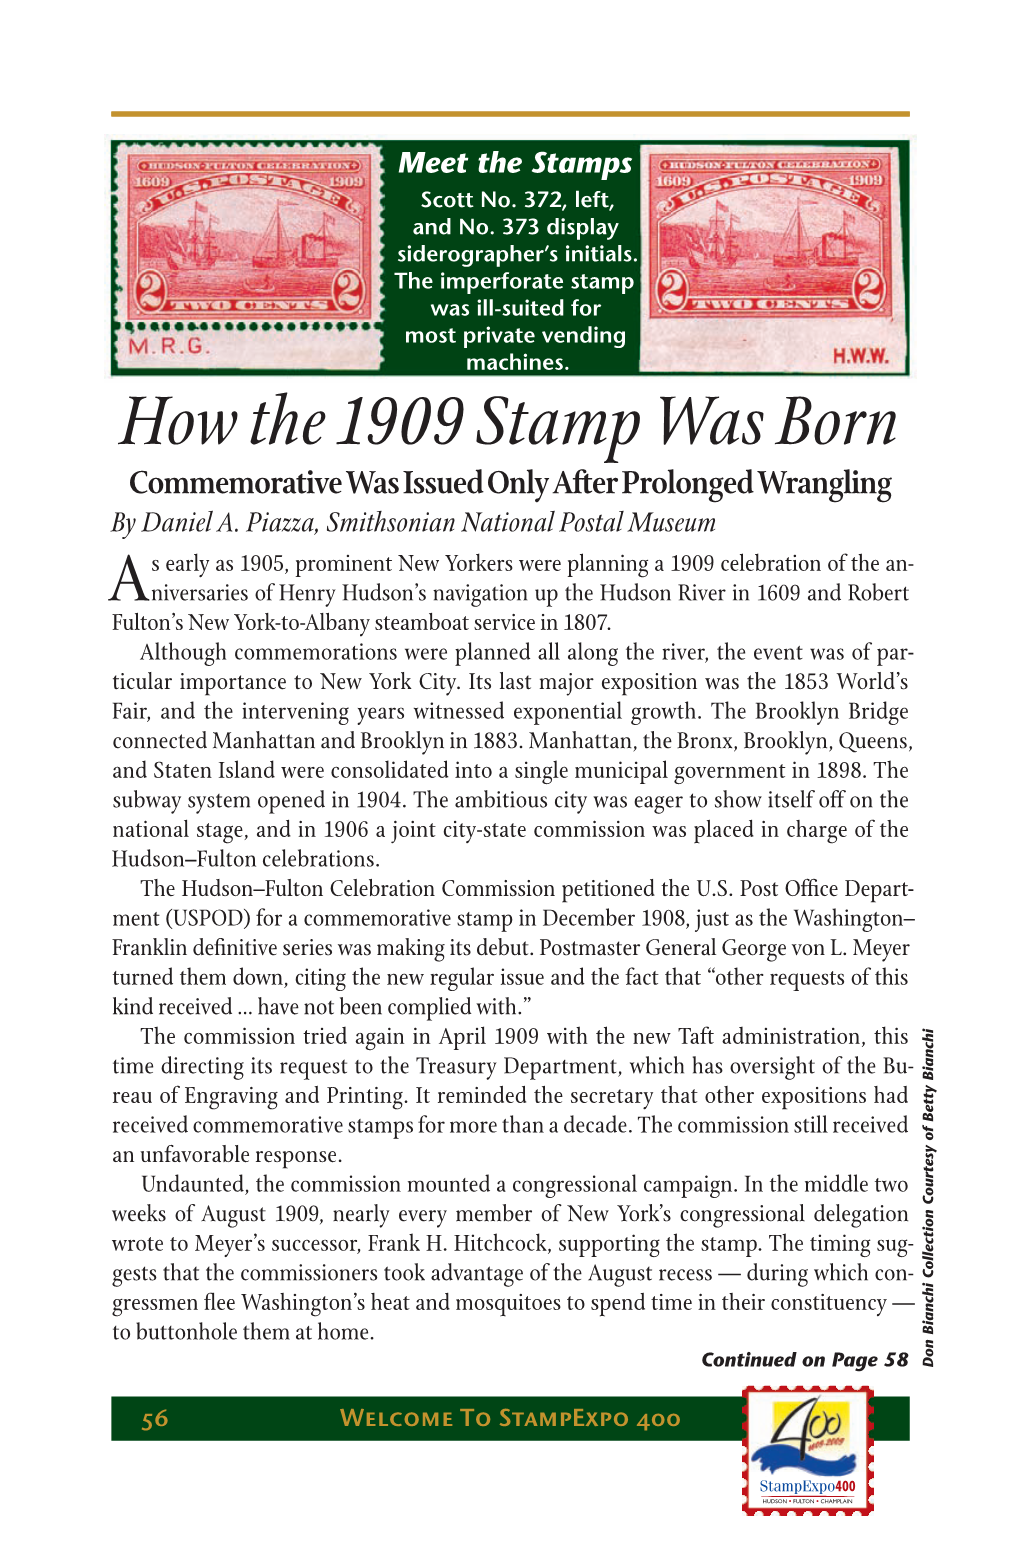 How the 1909 Stamp Was Born Commemorative Was Issued Only After Prolonged Wrangling by Daniel A